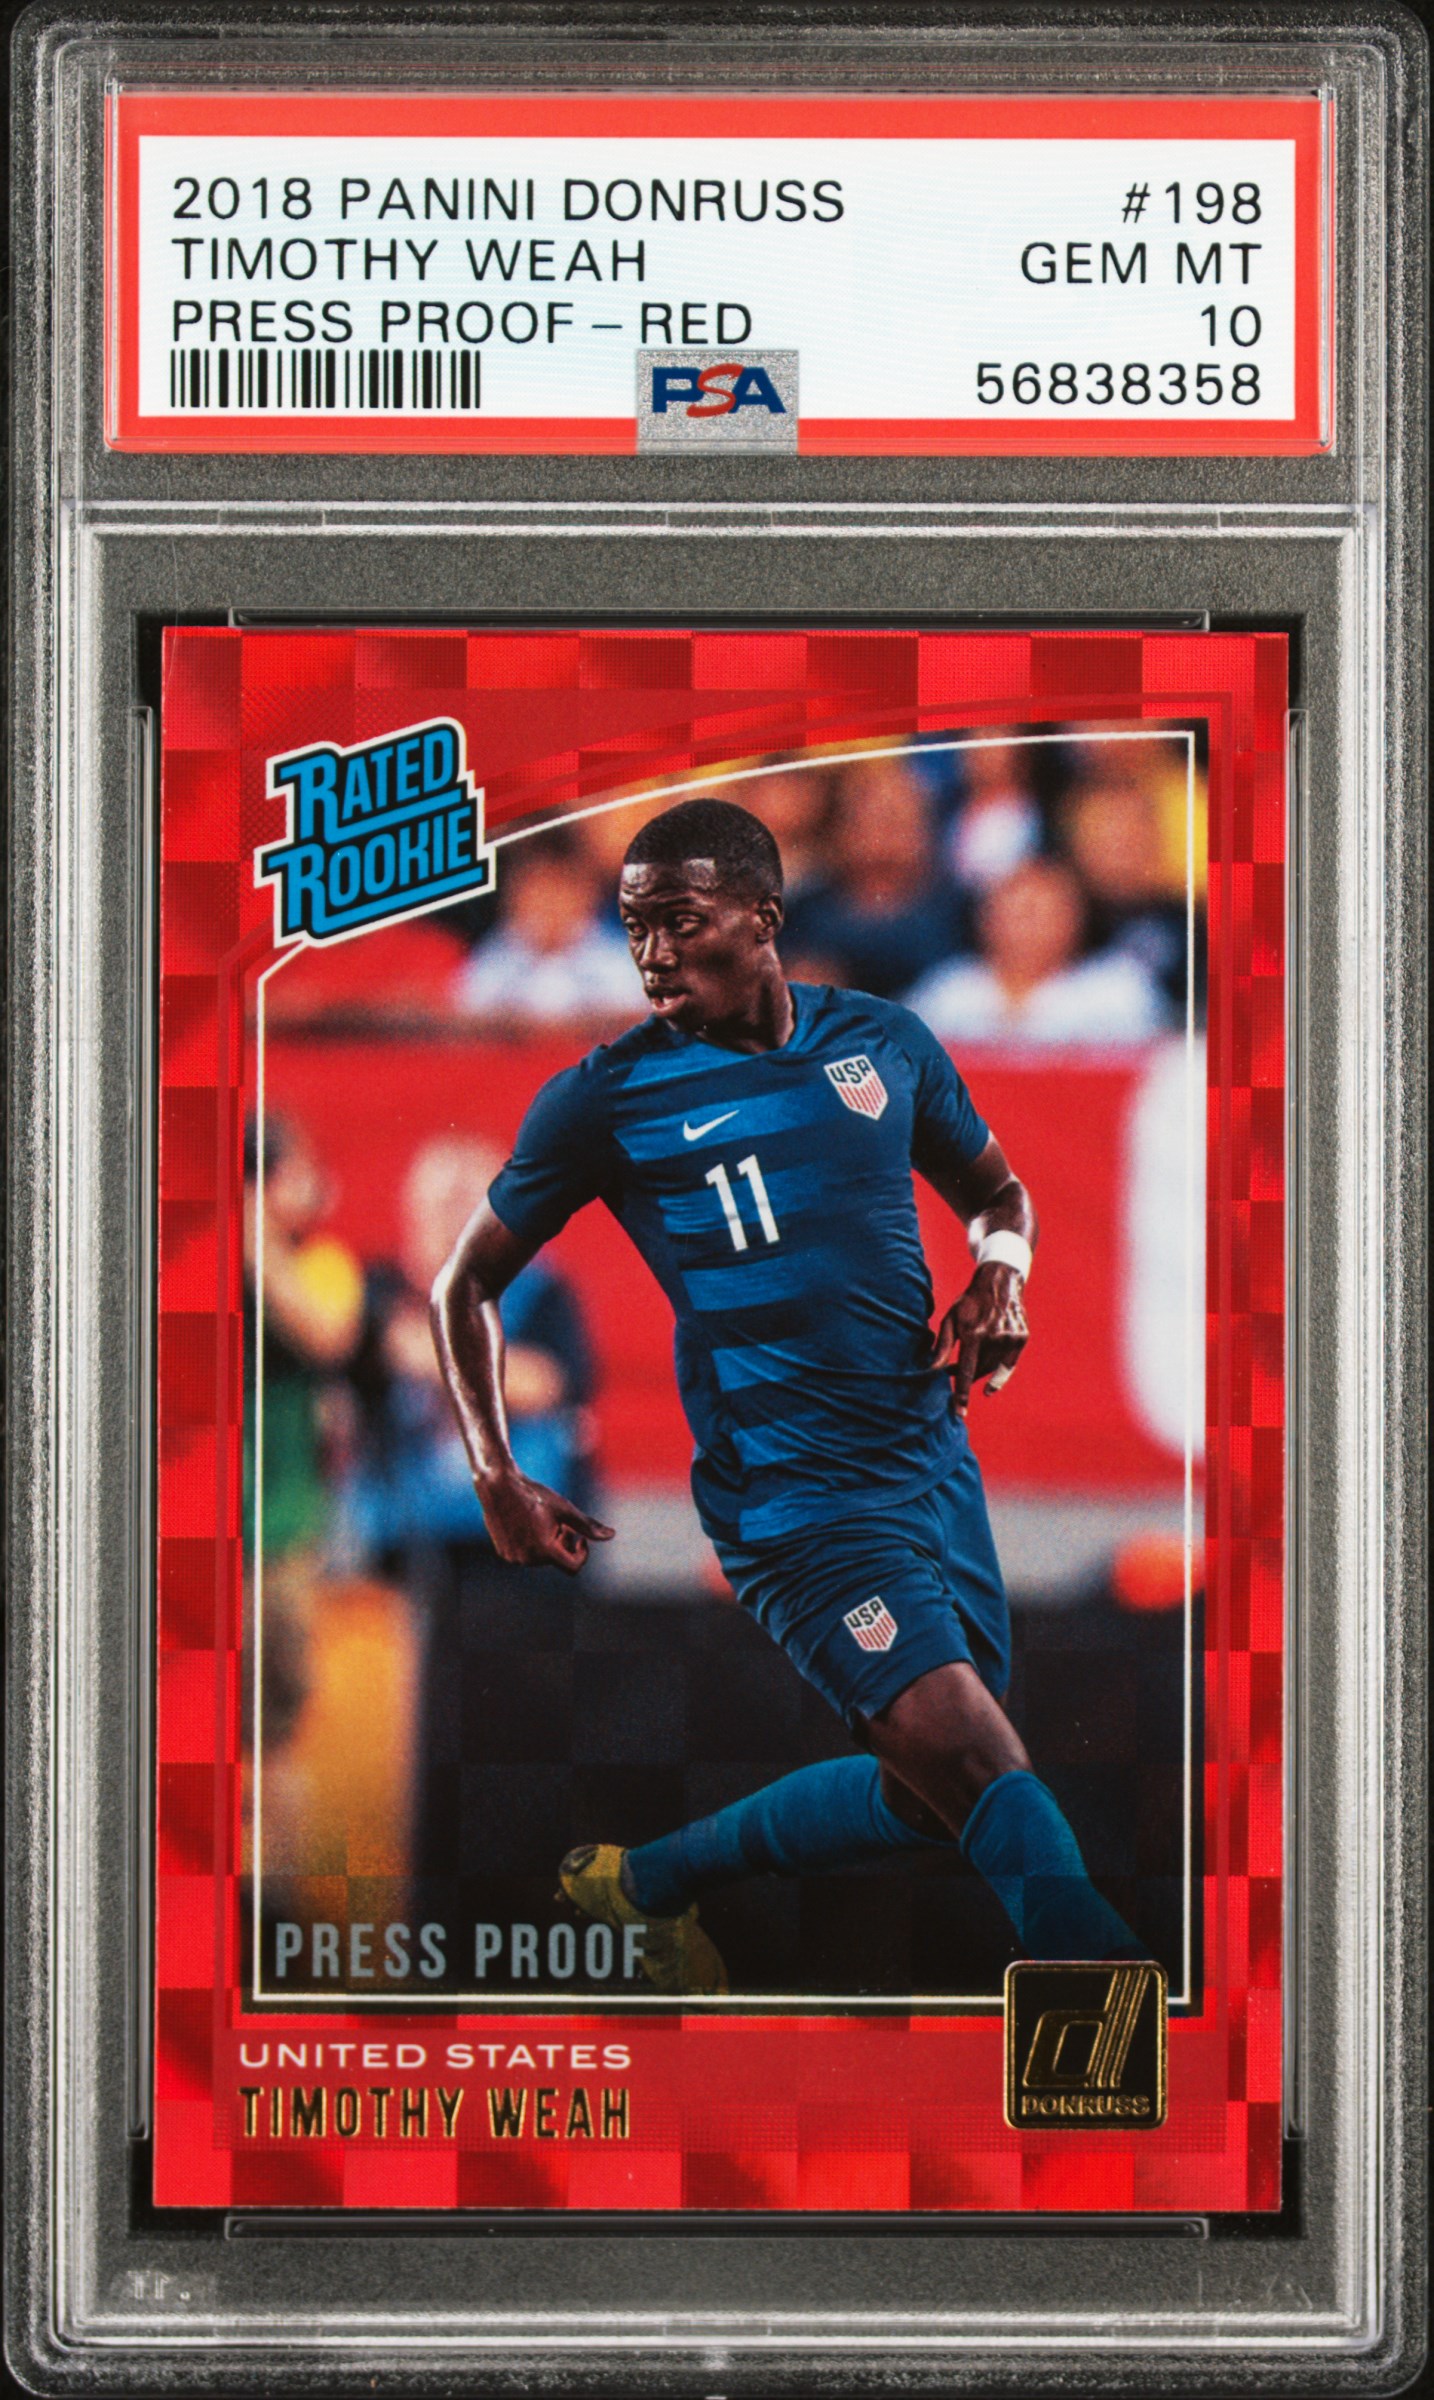 2018 Panini Donruss Press Proof-Red Rated Rookie #198 Timothy Weah Rookie Card – PSA GEM MT 10